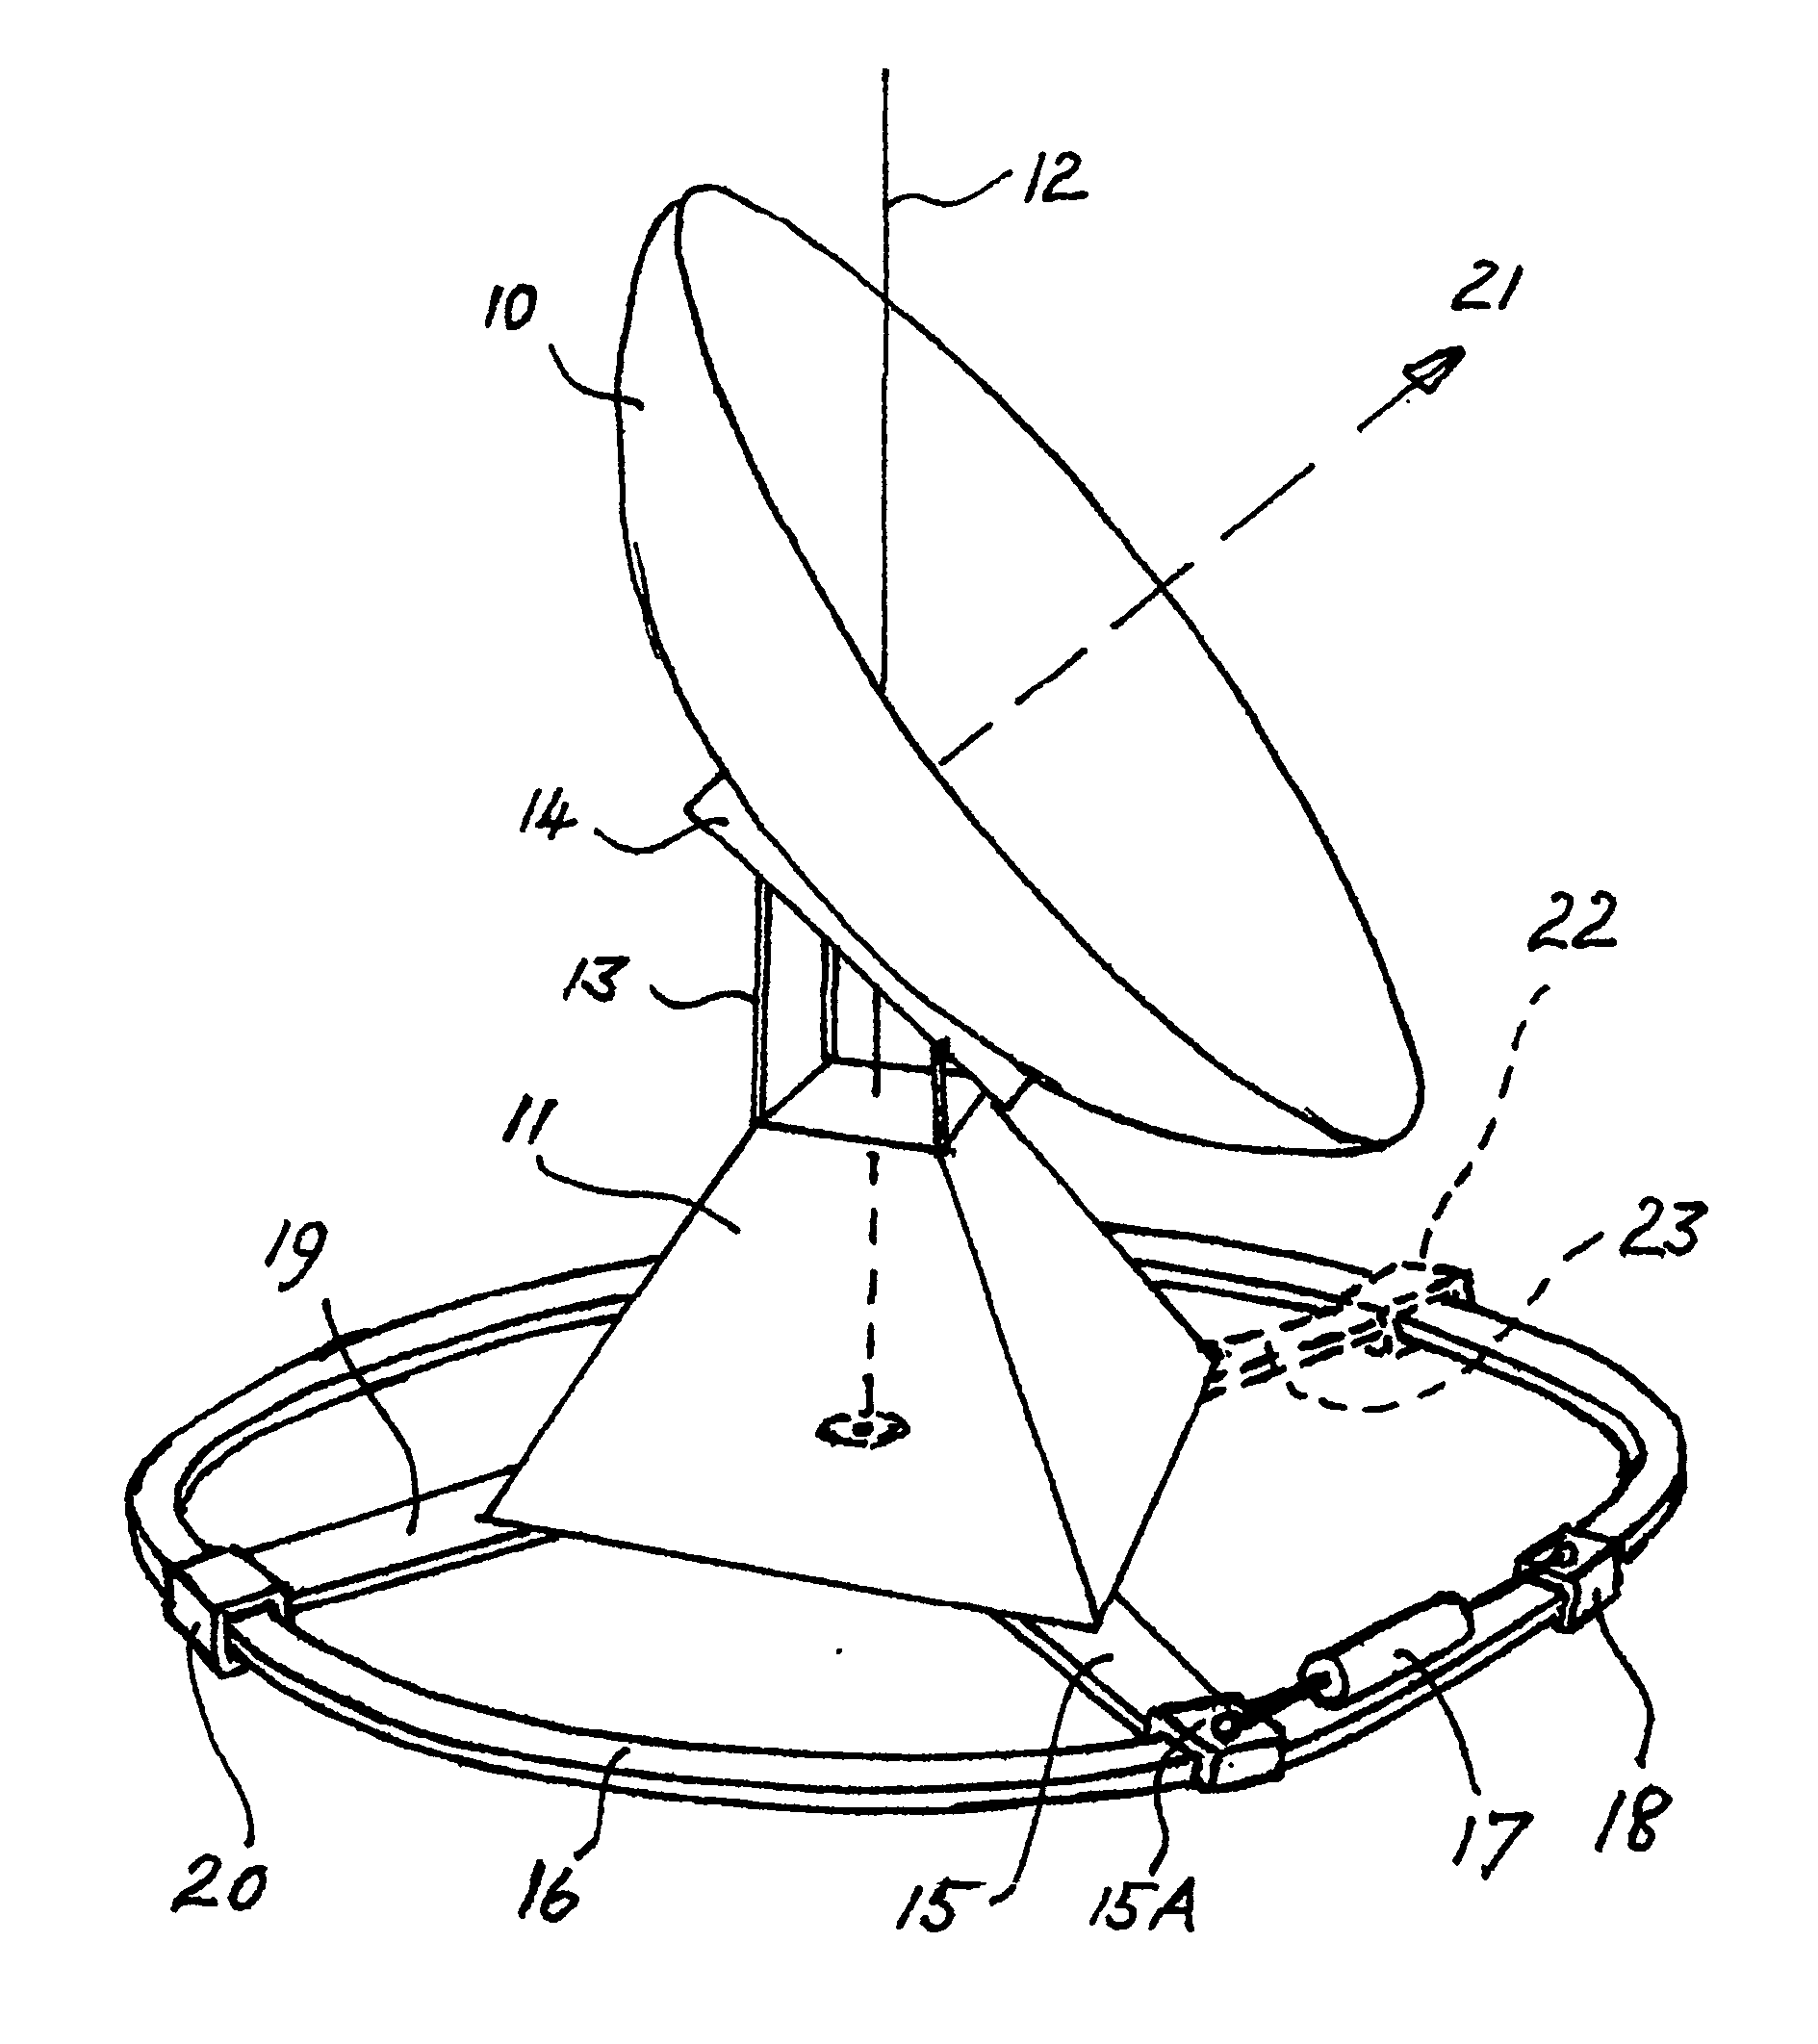 Apparatus for rotation of a large body about an axis